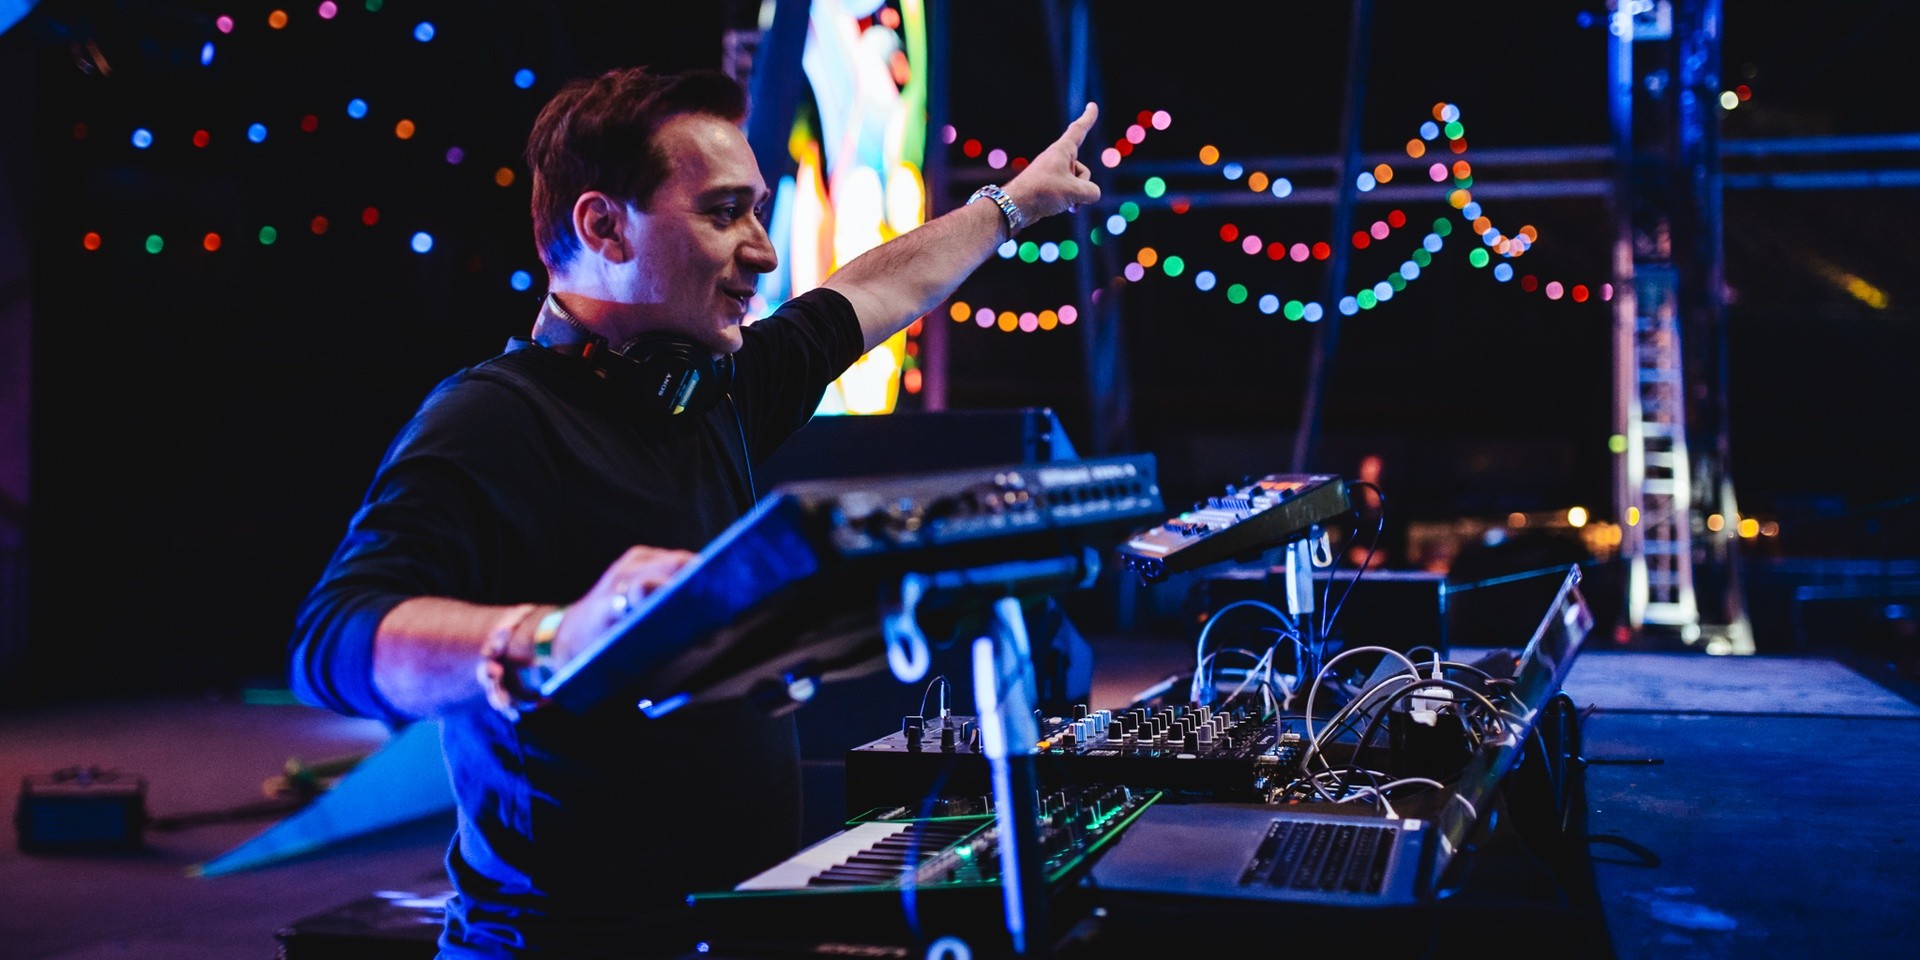 Paul van Dyk on keeping things exciting, coming back to Asia, and his upcoming album 'Off The Record'